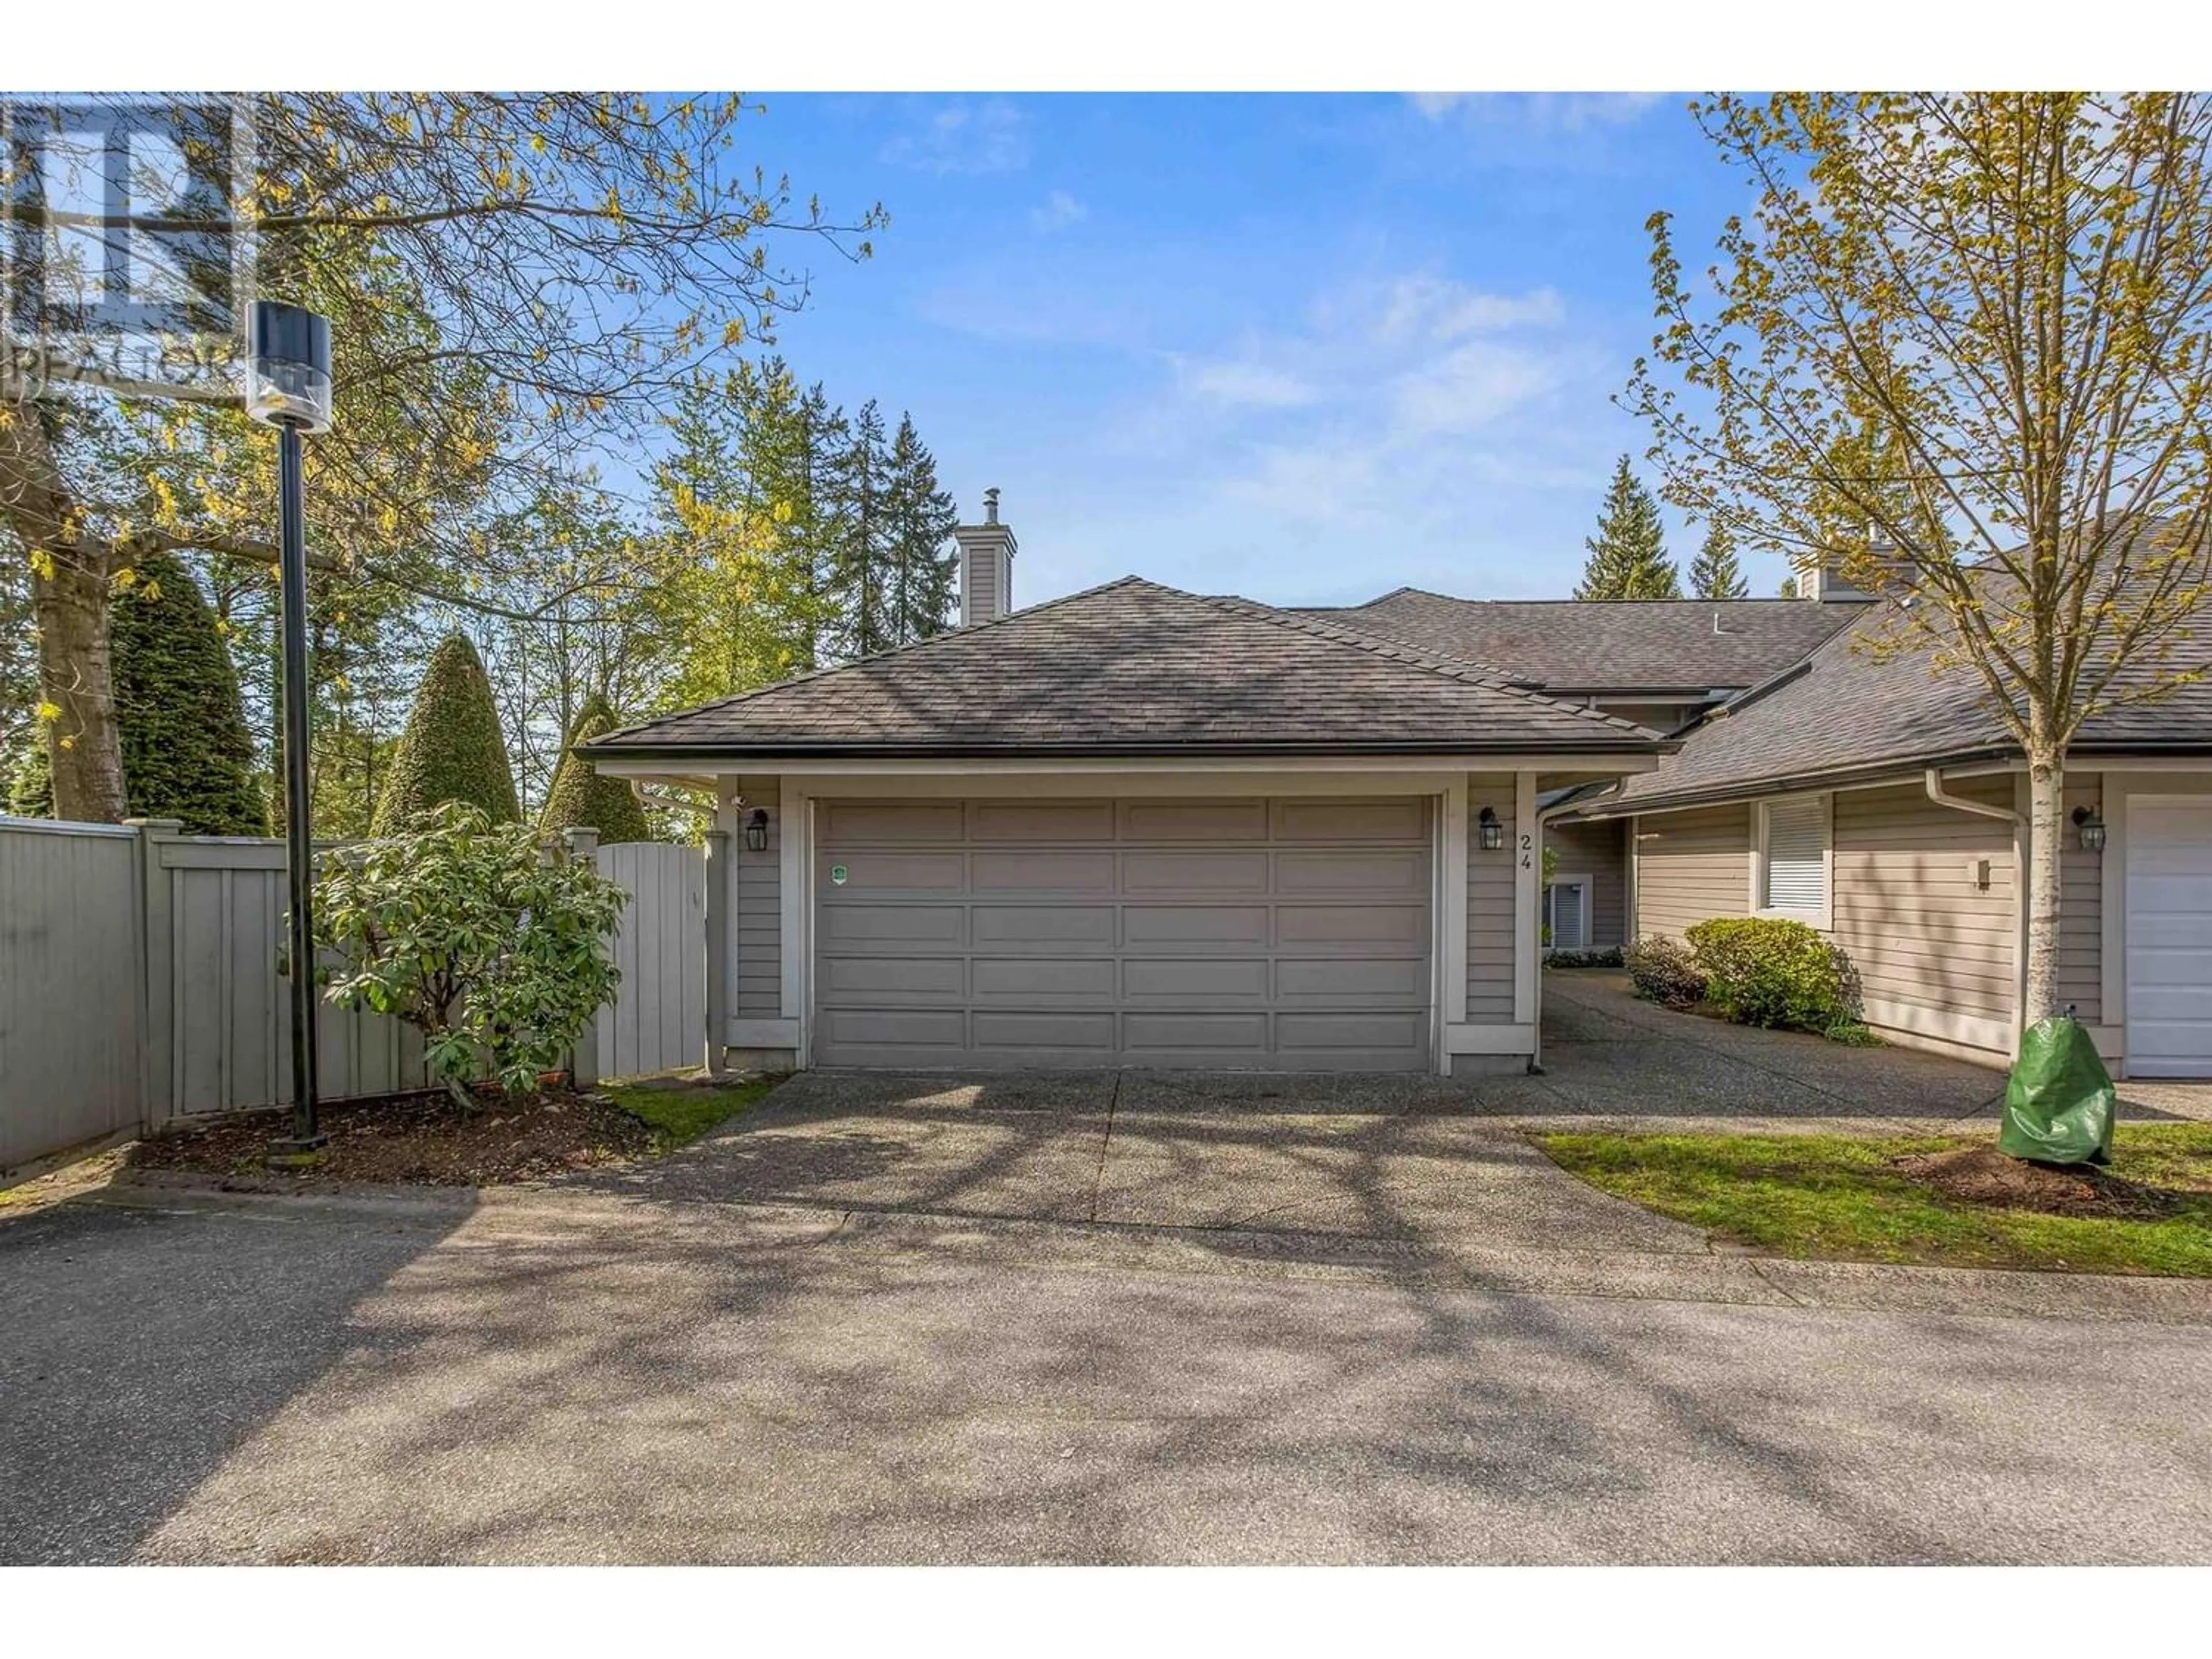 Frontside or backside of a home for 24 181 RAVINE DRIVE, Port Moody British Columbia V3H4T3